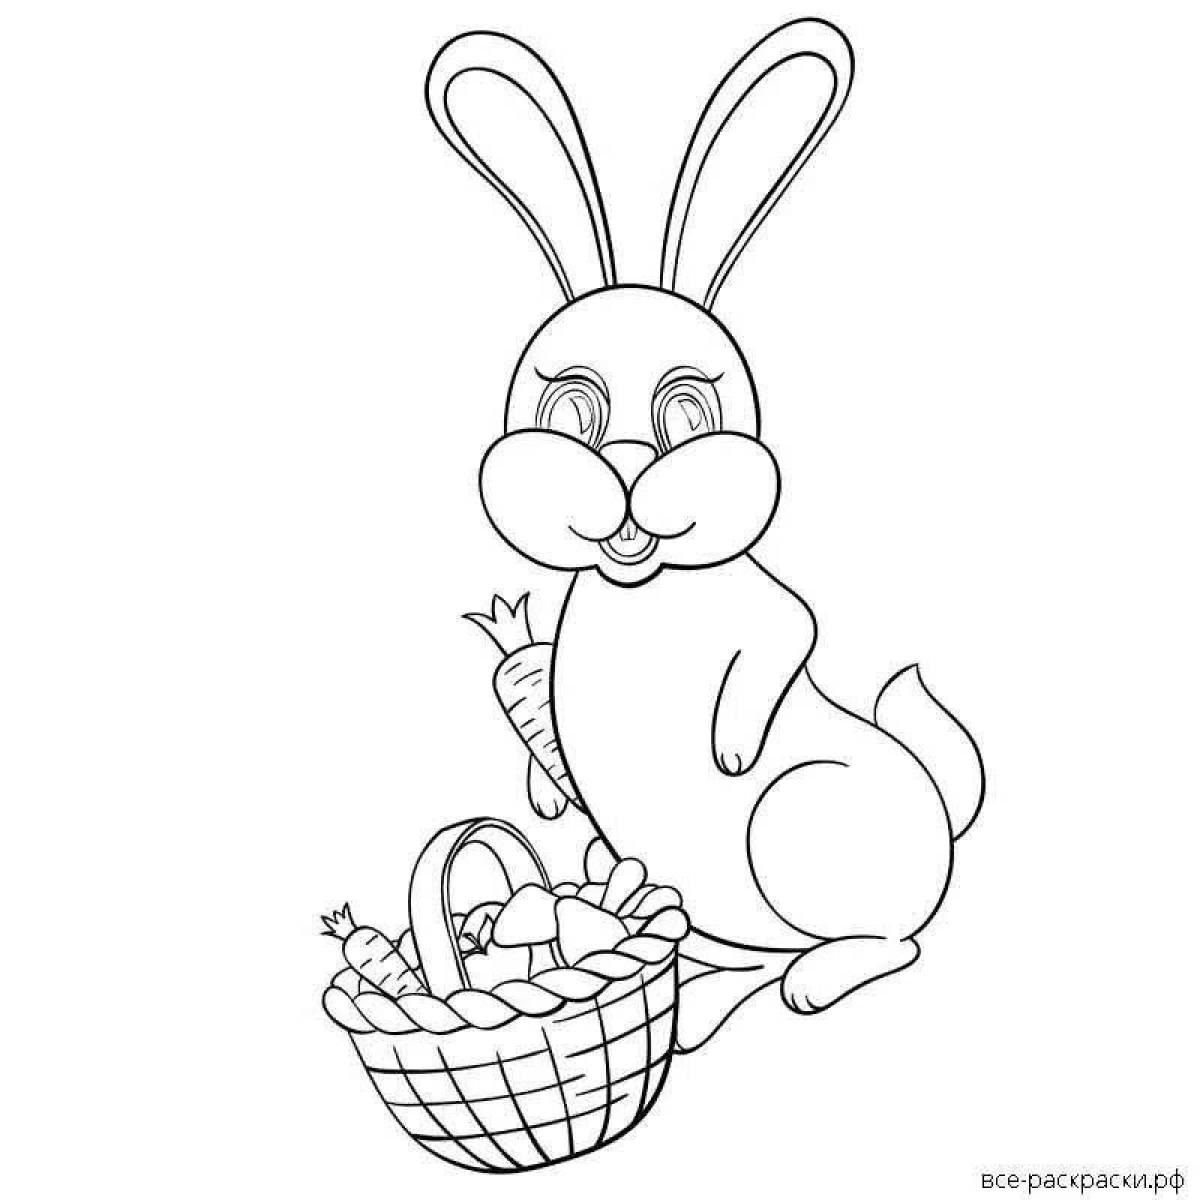 Fun coloring rabbit with carrots